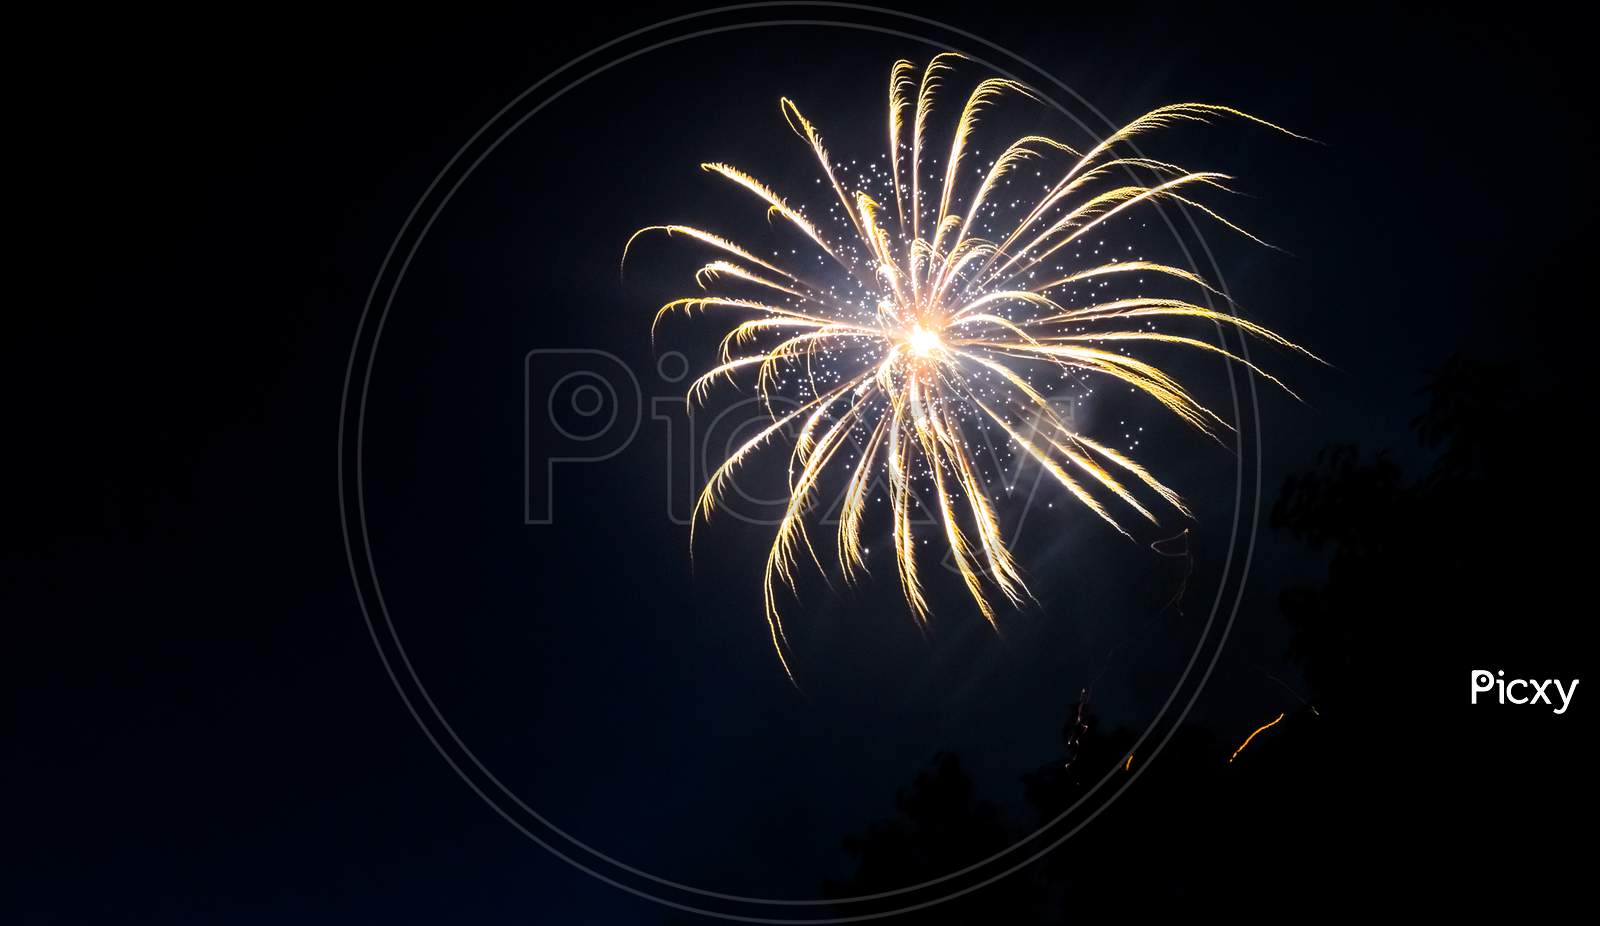 White And Yellow Fireworks At Night Sky With Visible Trees